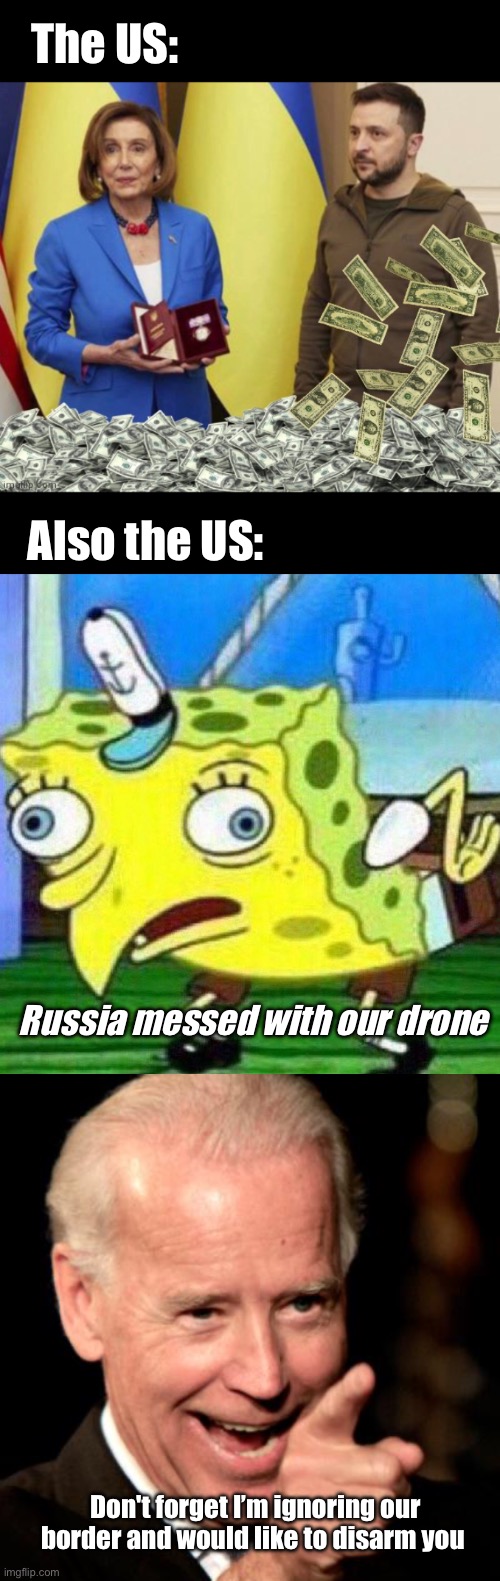 Saber rattling |  The US:; Also the US:; Russia messed with our drone; Don't forget I’m ignoring our border and would like to disarm you | image tagged in nancy pelosis zelensky and cash payoff,triggerpaul,memes,smilin biden,politics lol | made w/ Imgflip meme maker